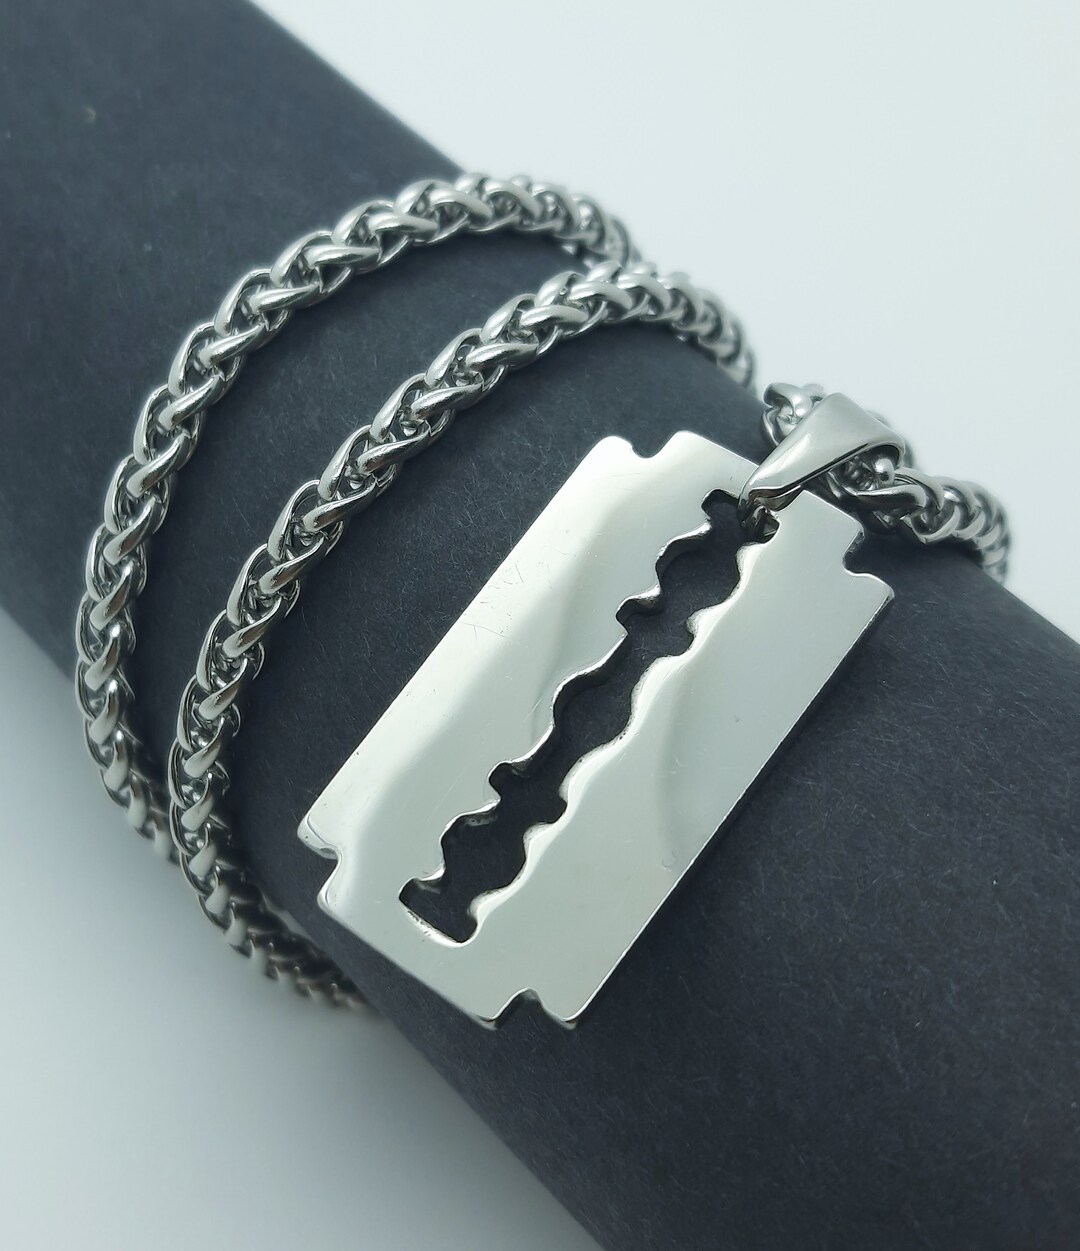 LURS Shaving Blade & Saw Blade Necklace | PROJECTISR US